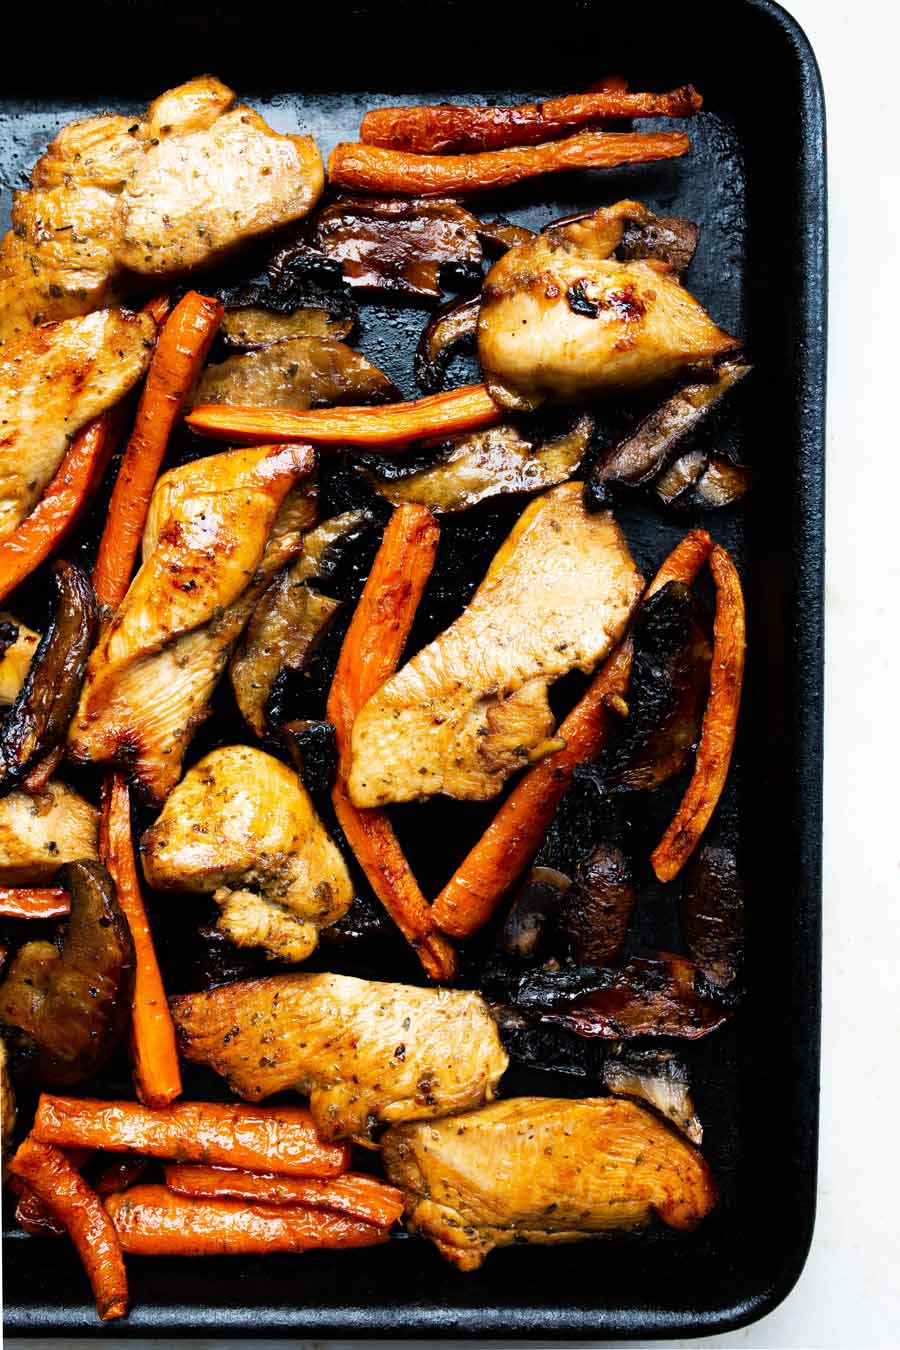 healthy one-pan dinner with chicken and vegetables